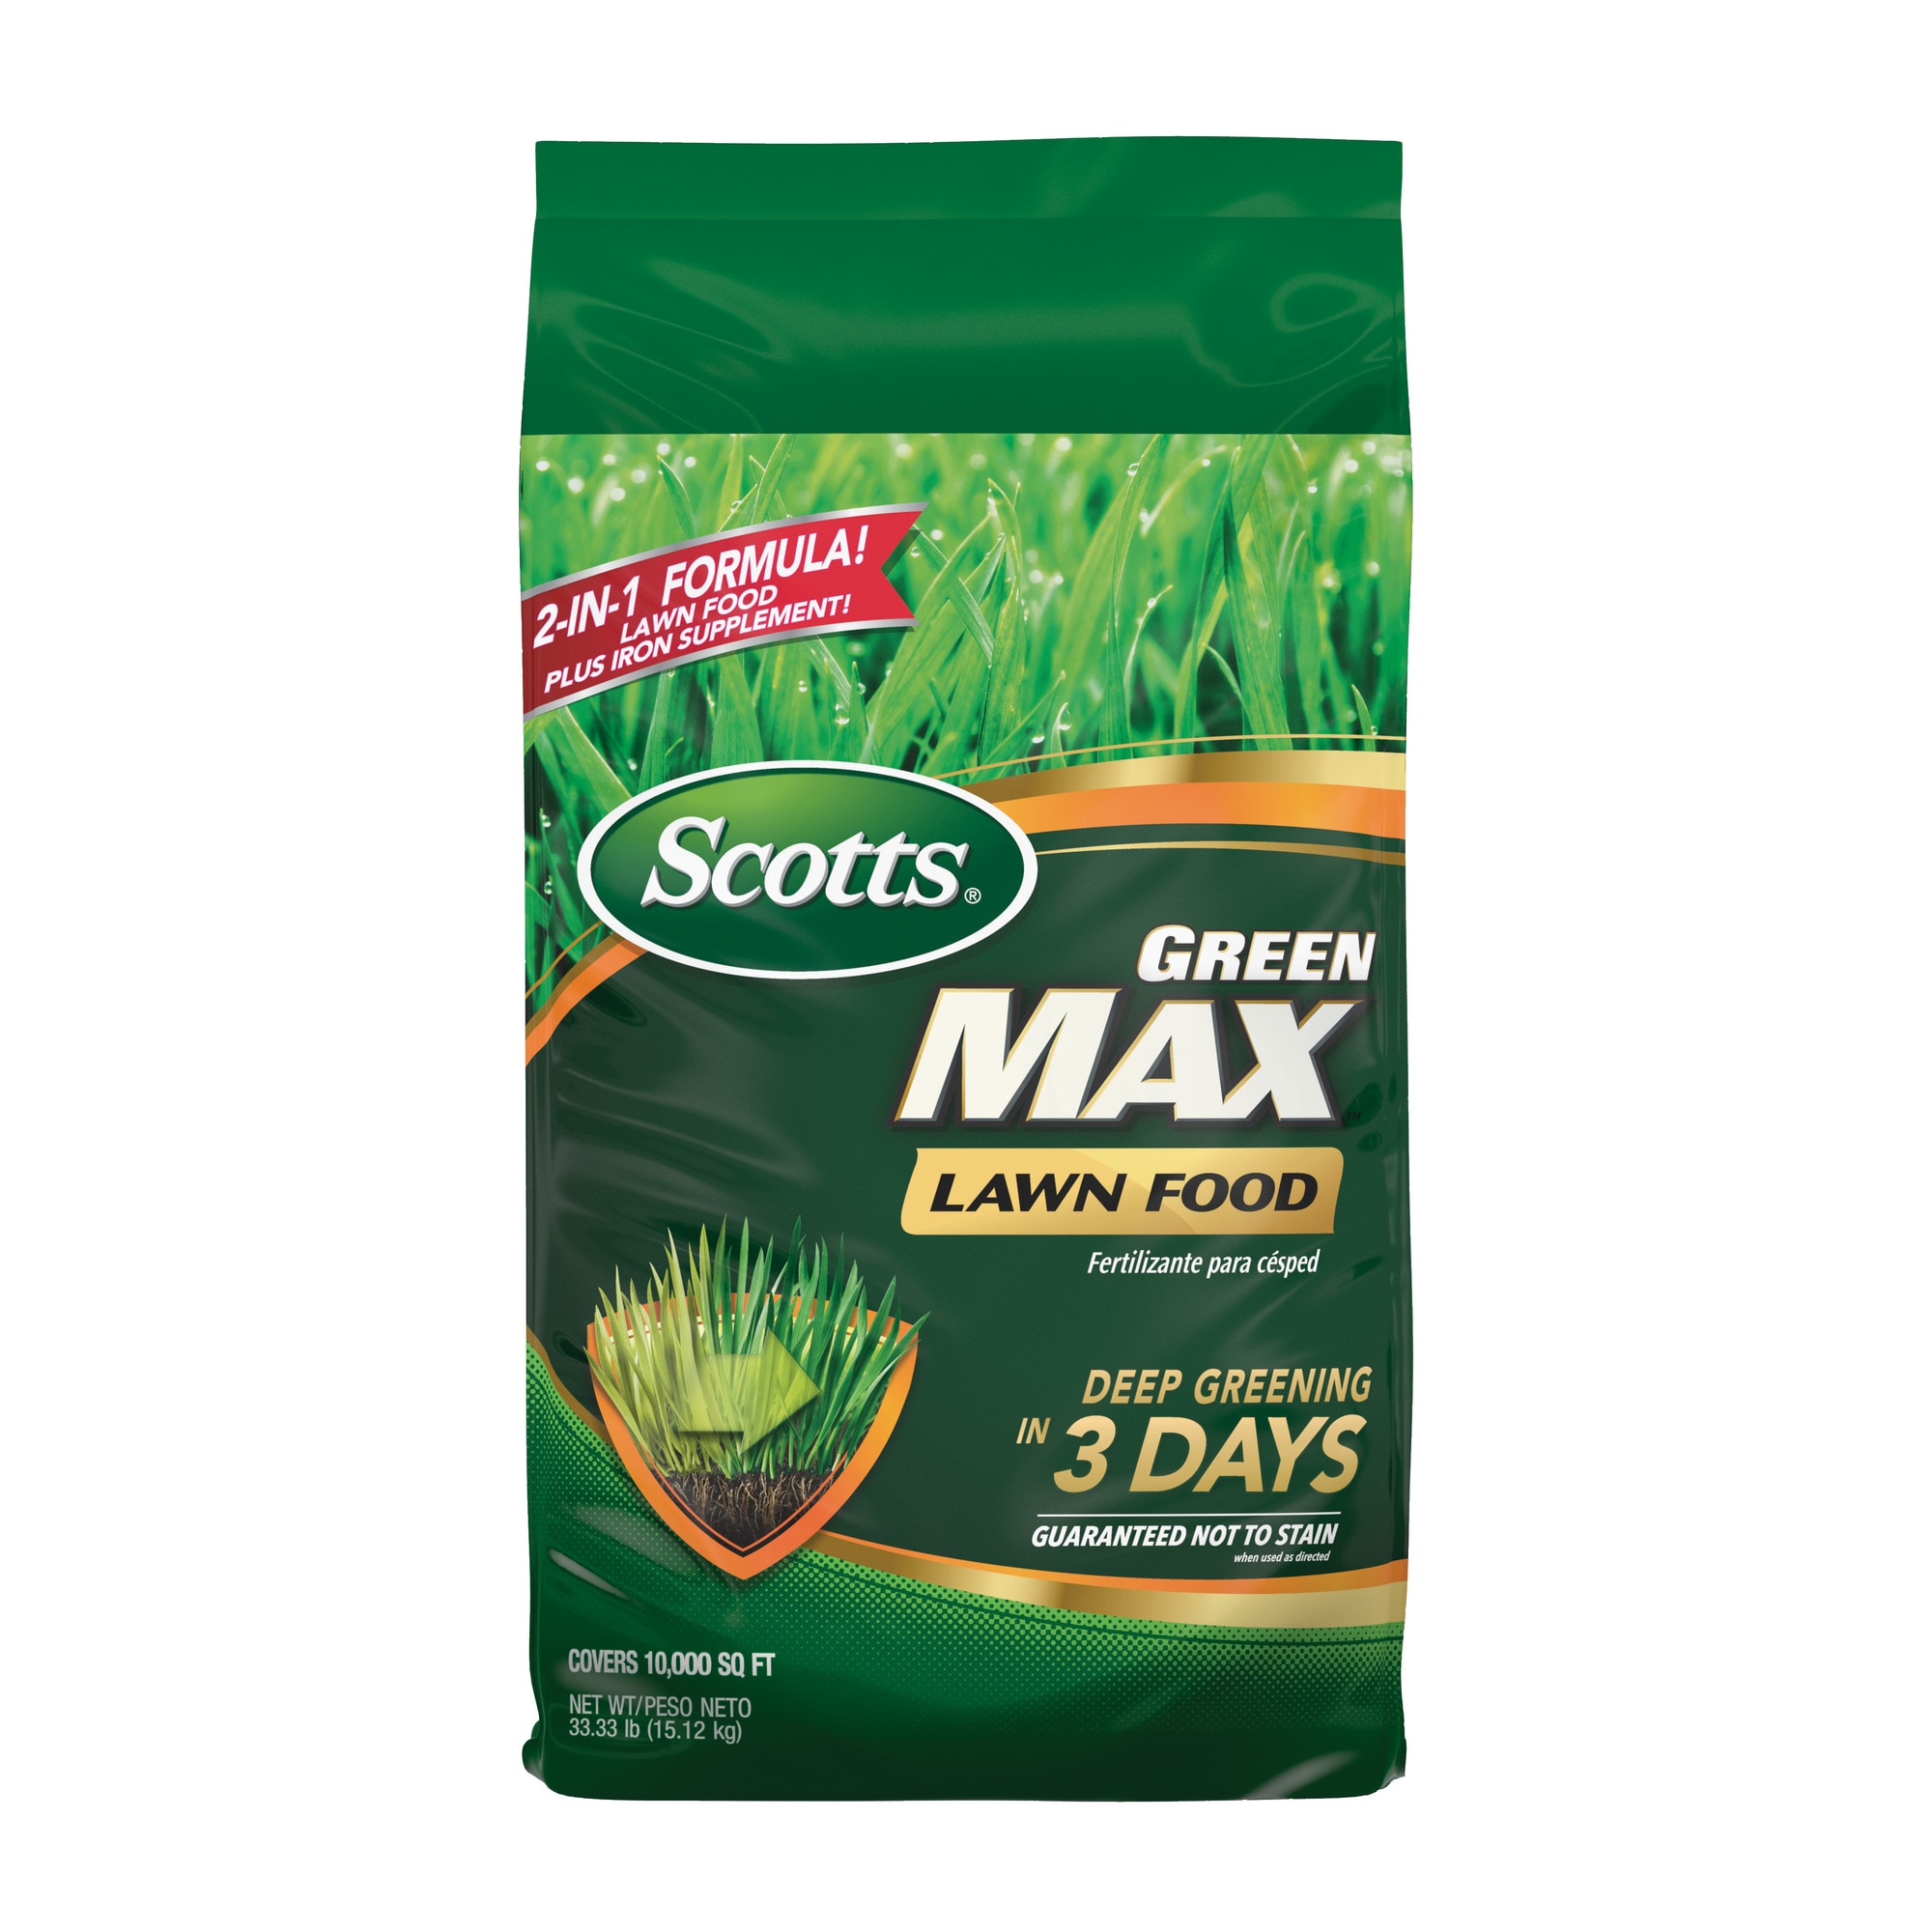 When is the Best Time to Use Scotts Green Max?